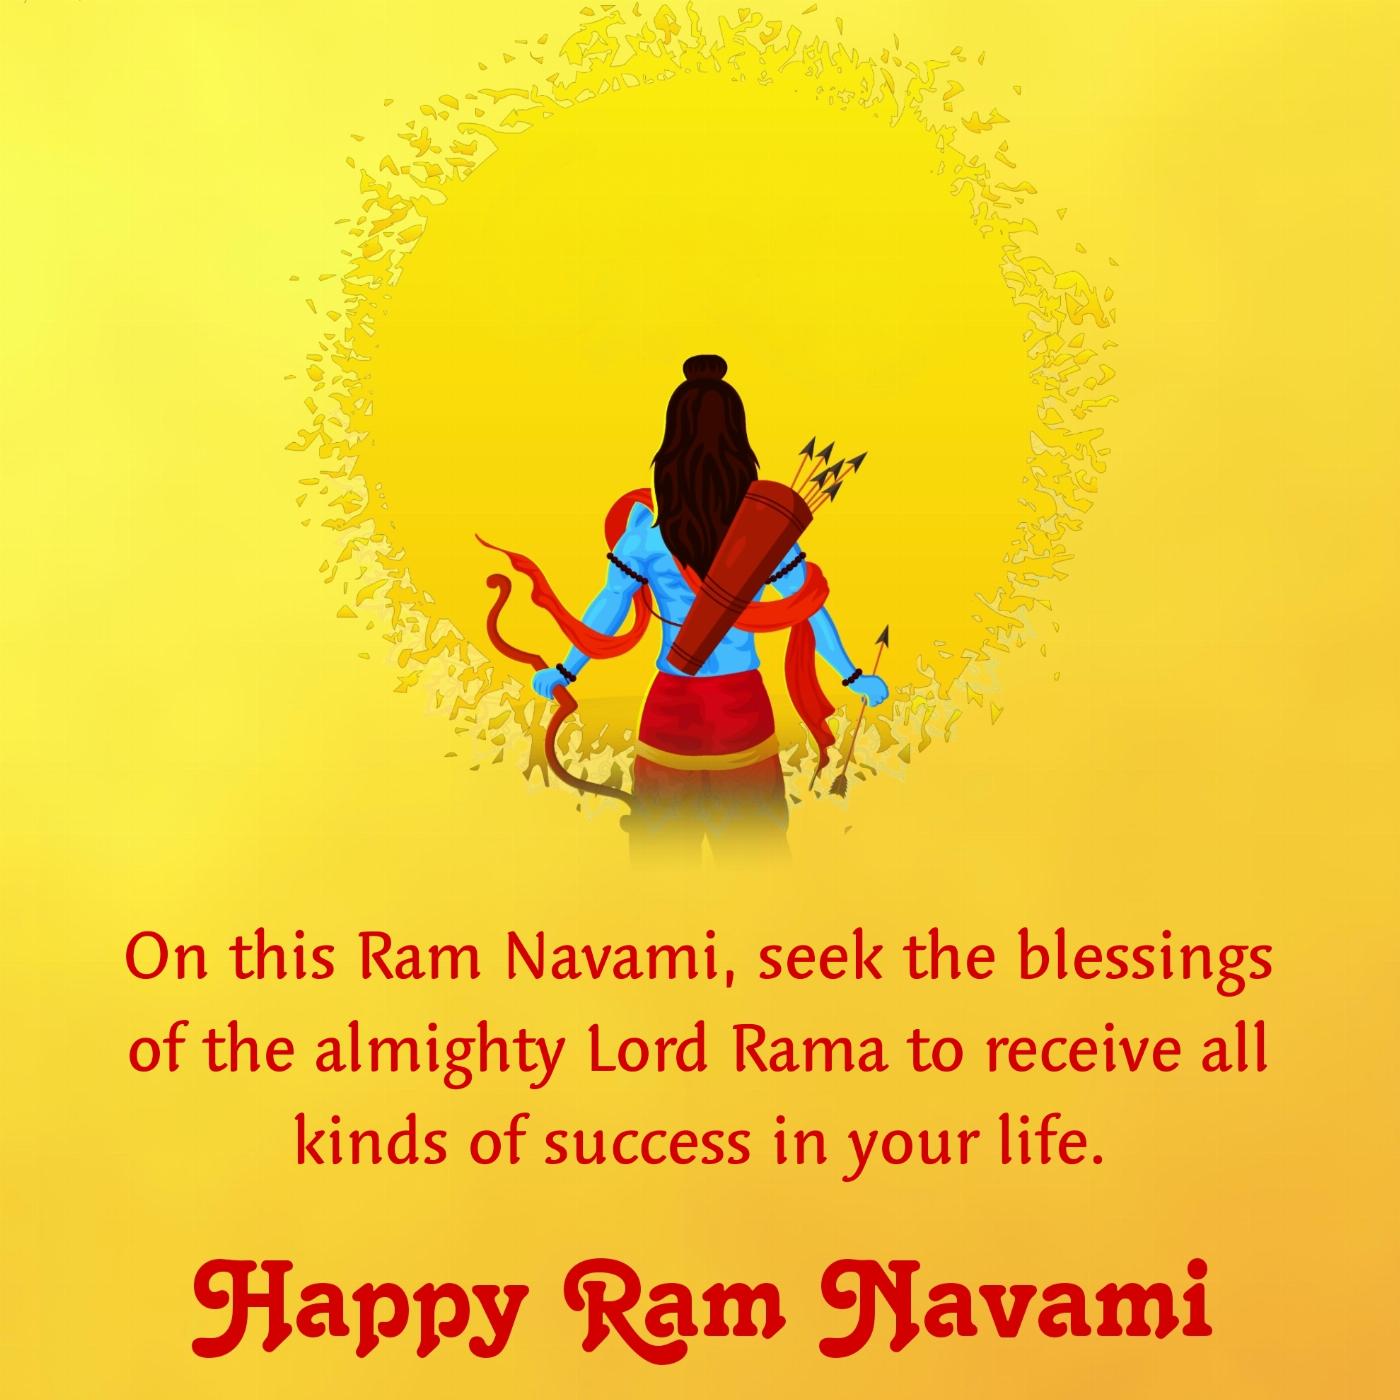 On this Ram Navami seek the blessings of the almighty Lord Rama